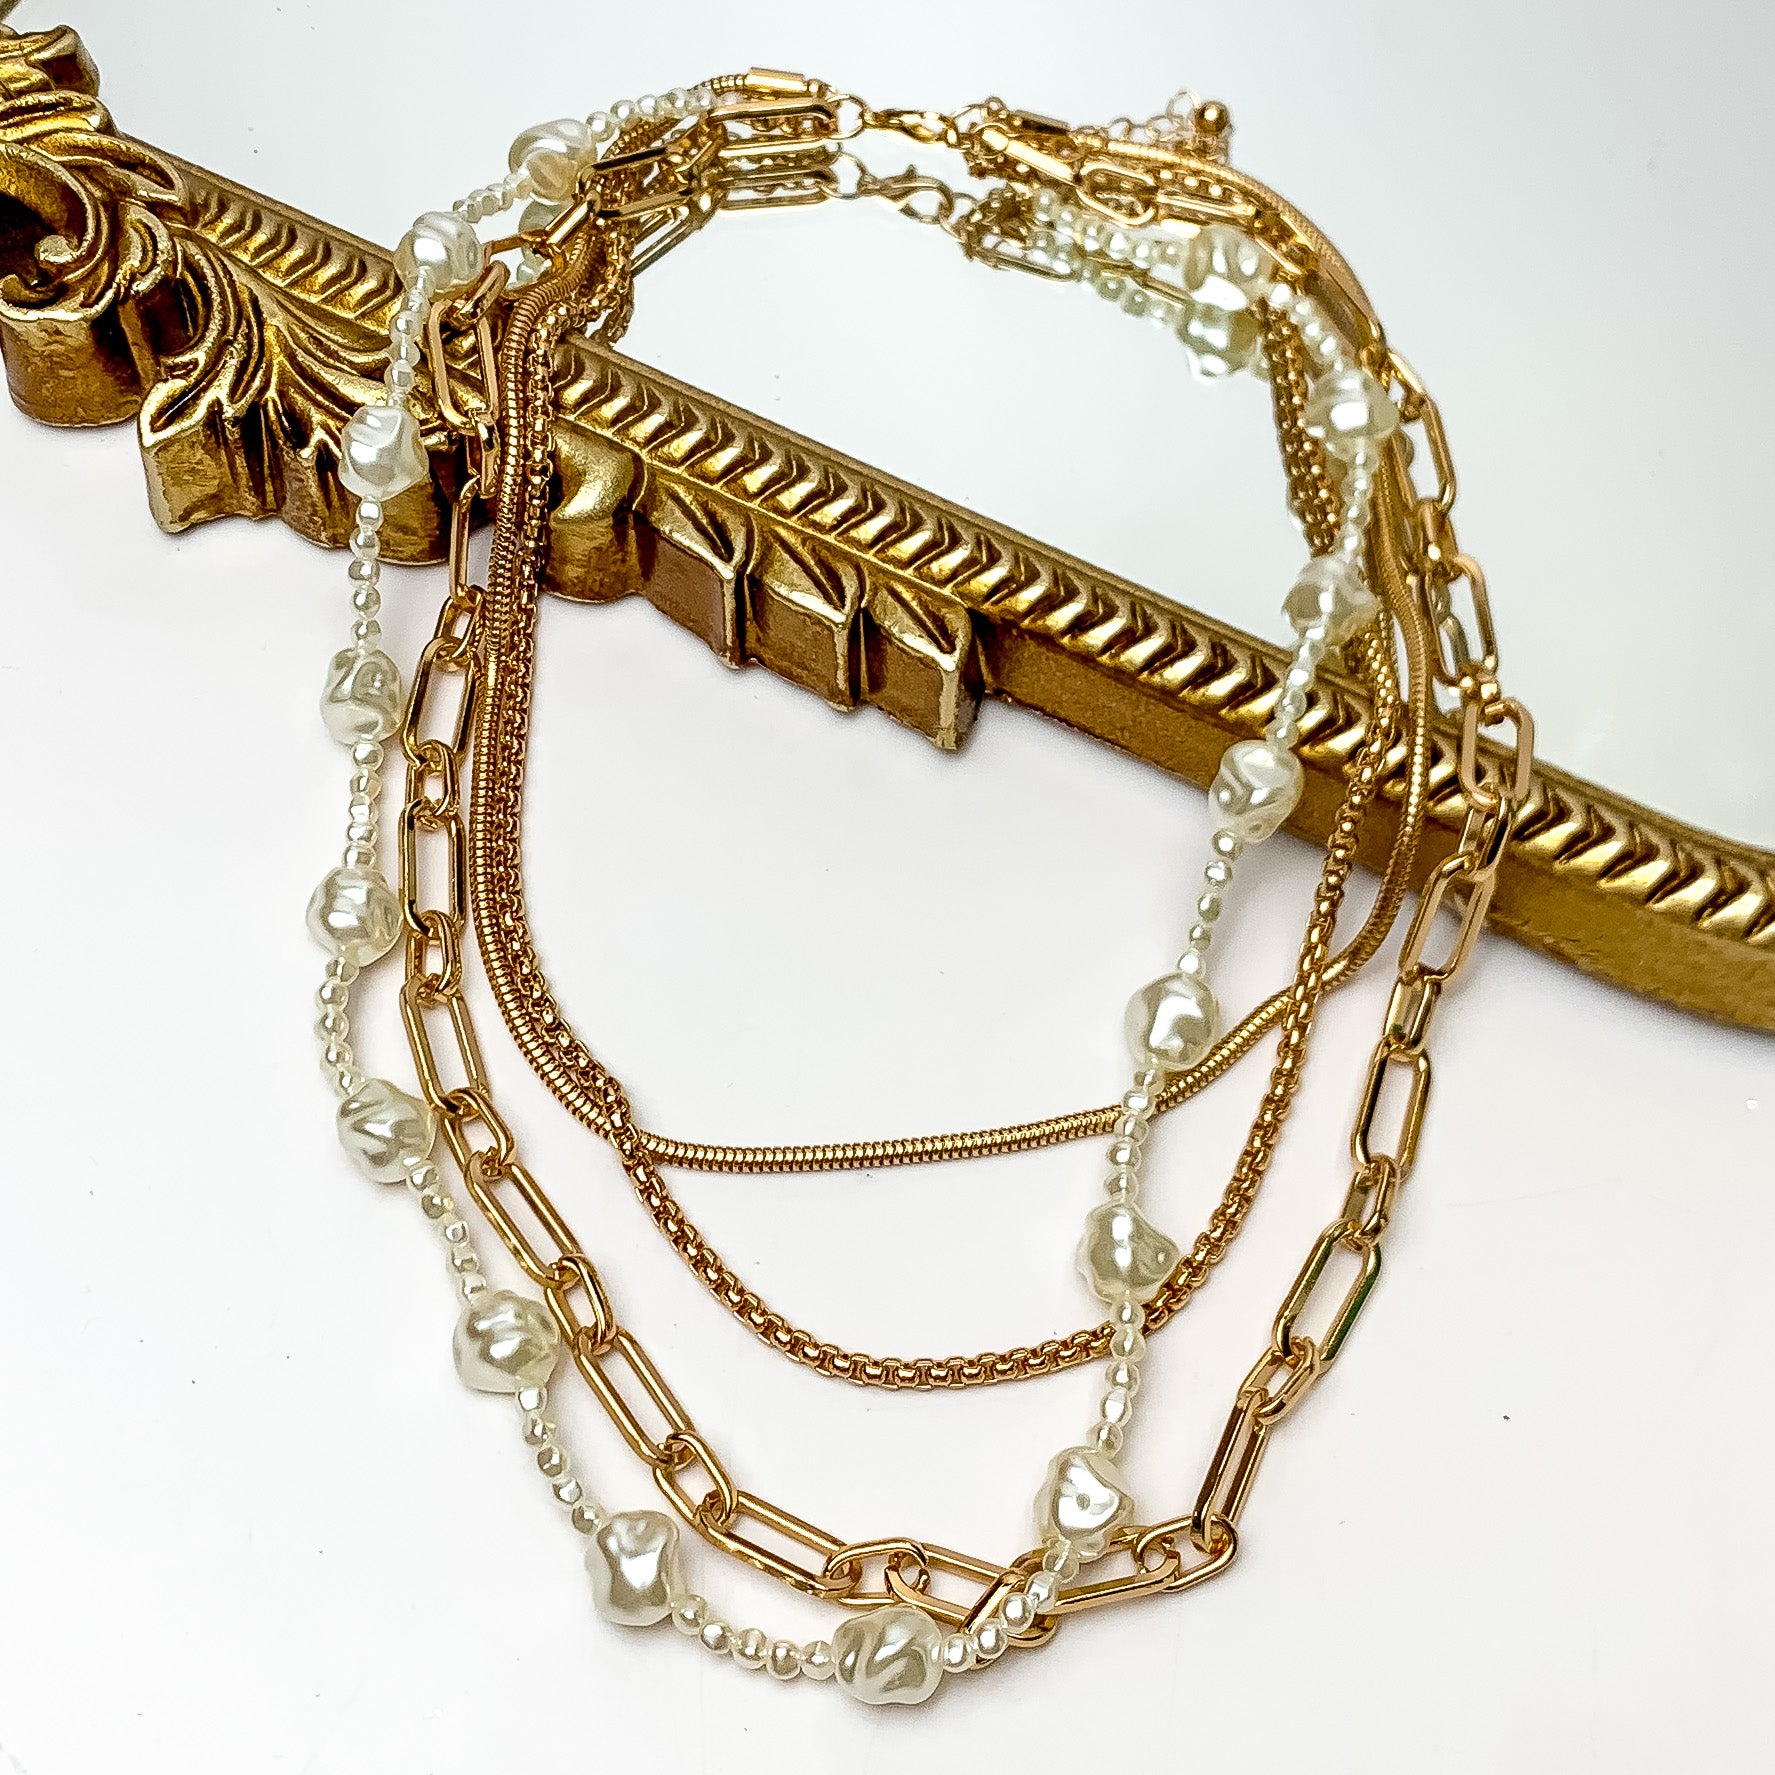 Four Strand Gold Tone Chain Necklace With Pearl Strand. Pictured on a white background with part of the necklace laying on a mirror with a gold trim.